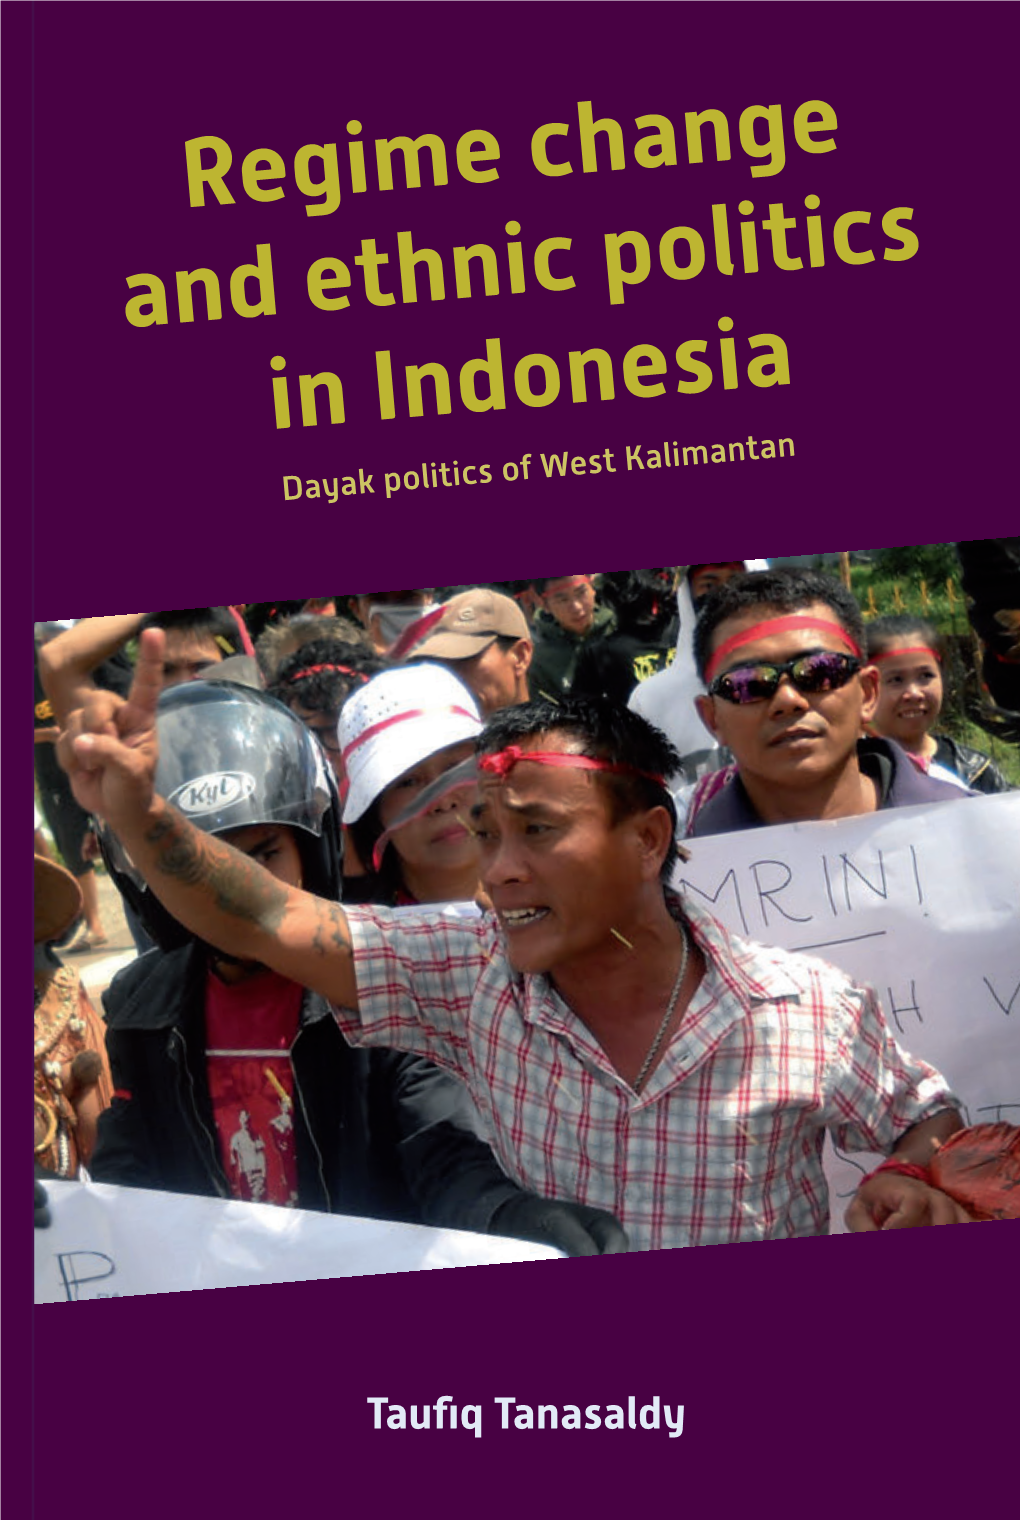 Regime Change and Ethnic Politics in Indonesia Politics with Strong Ethnic Content Emerged Across the Country